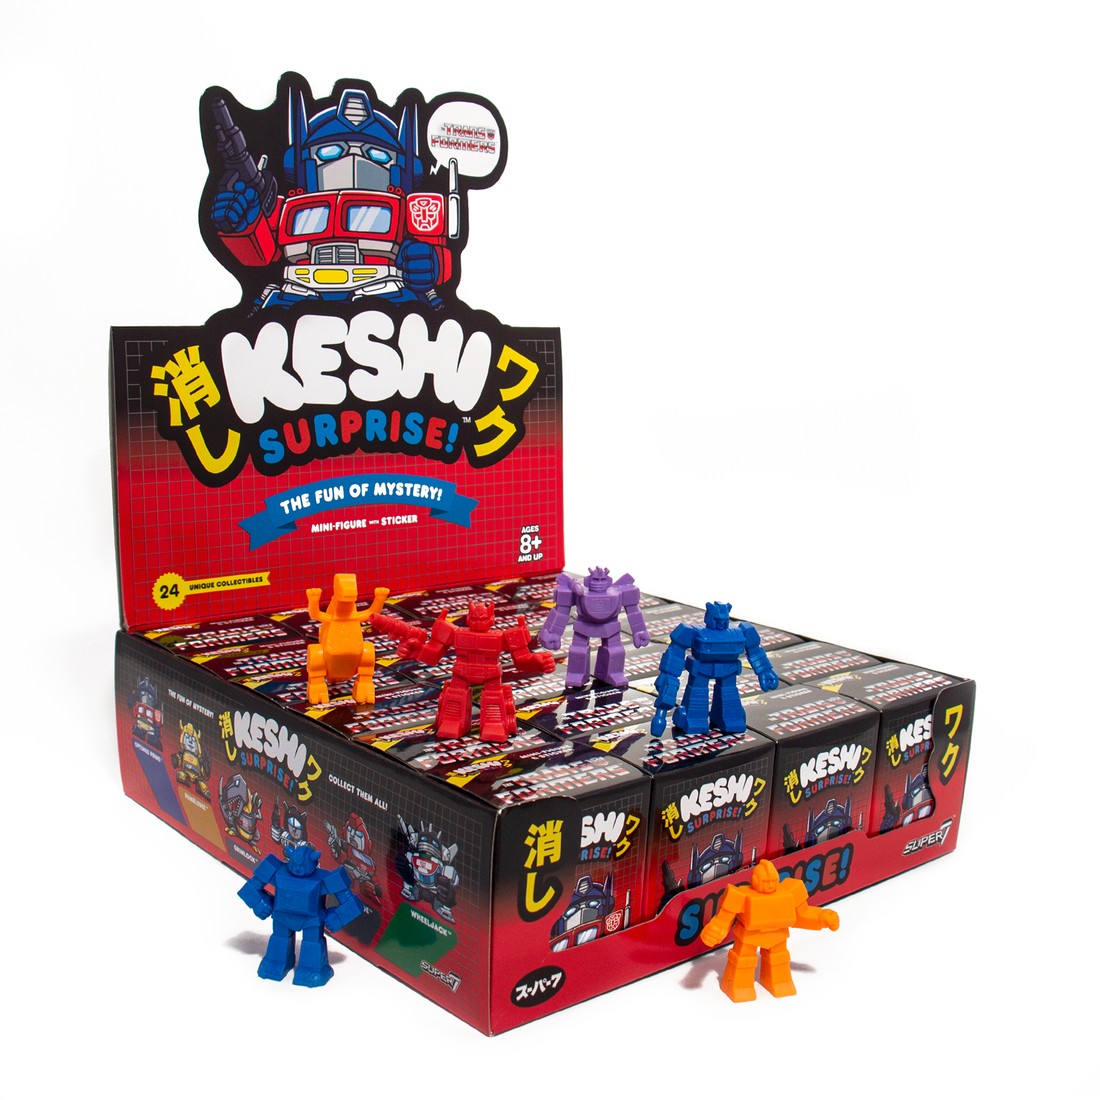 Transformers Keshi Surprise - Transformers by Super7 (1 BLIND BOX)